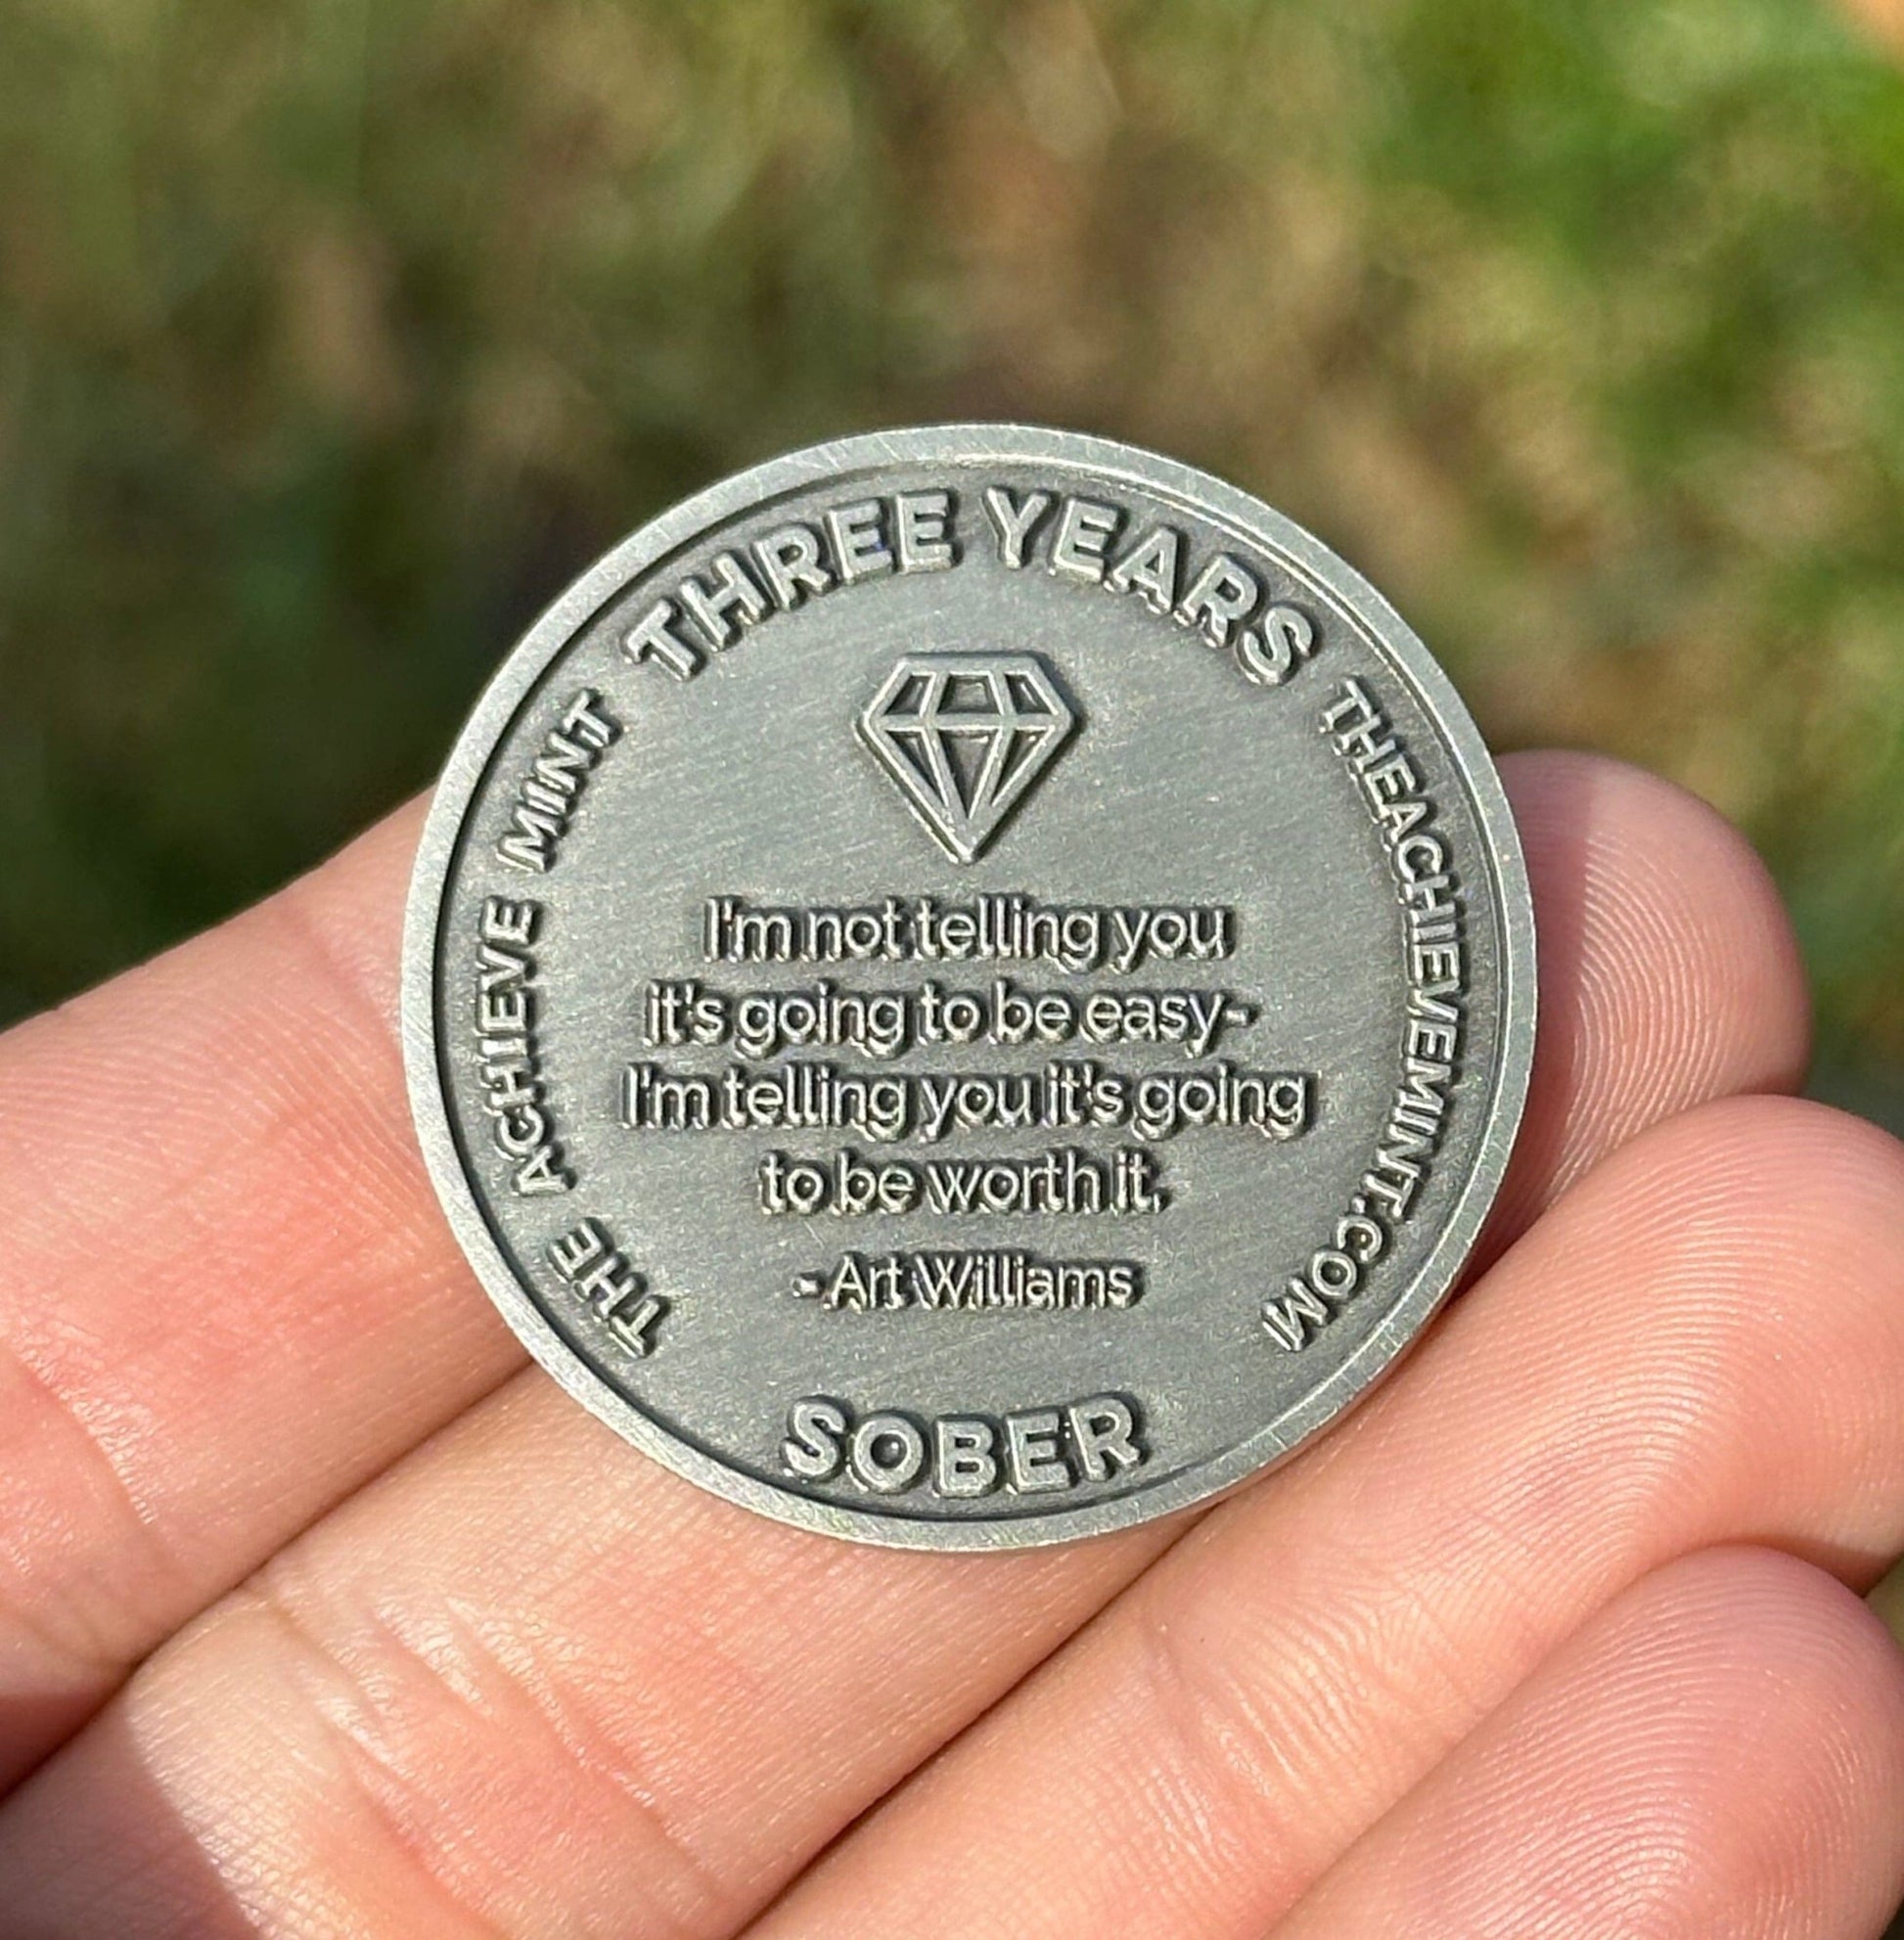 Three Years Sober sobriety coin - The Achieve Mint